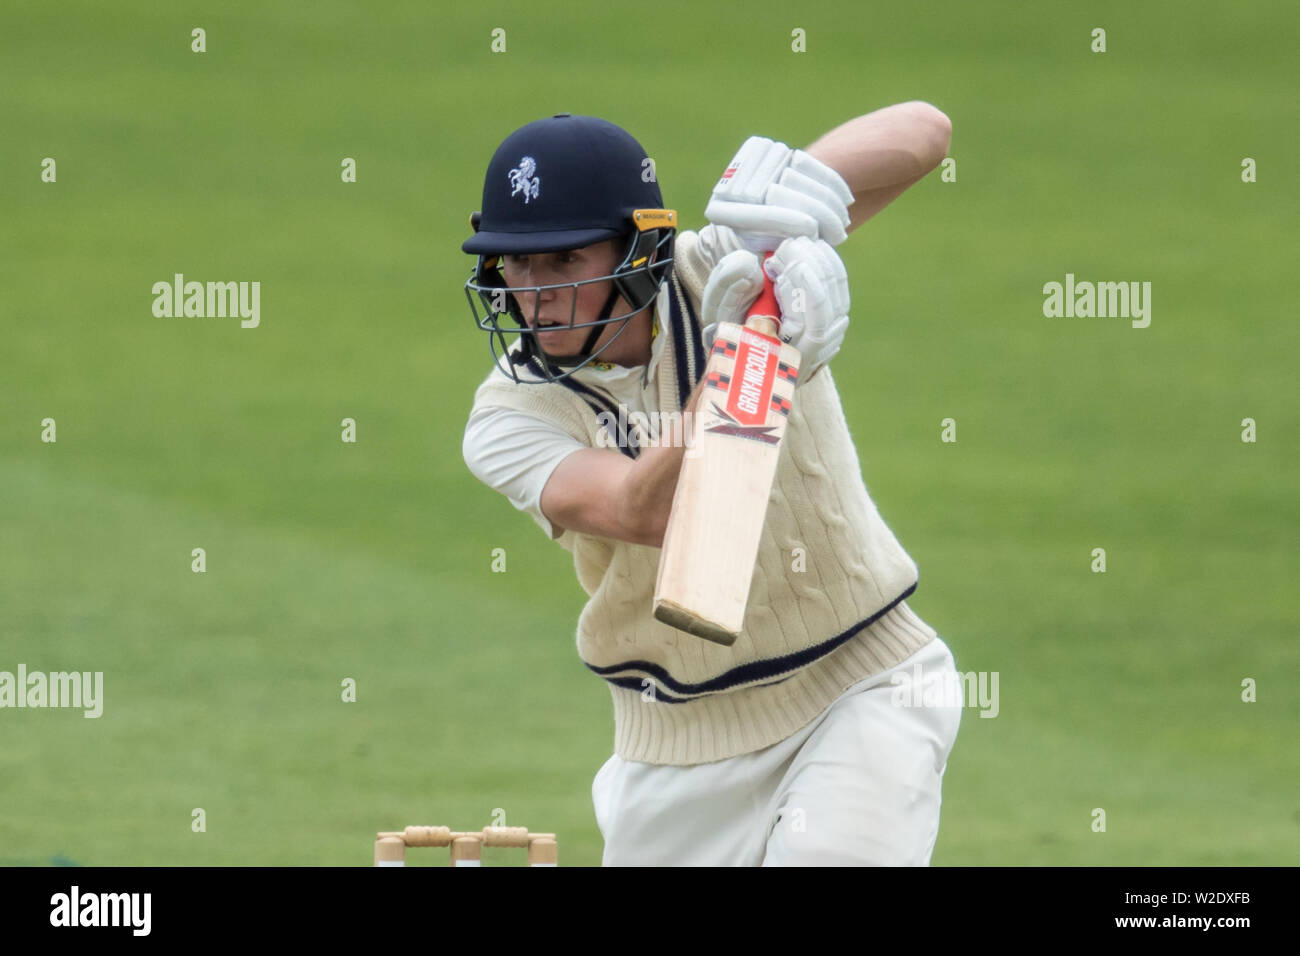 London, UK. 8th July, 2019. Zak Crawley batting for Kent against Surrey on day two of the Specsavers County Championship game at the Oval. Credit: David Rowe/Alamy Live News Stock Photo